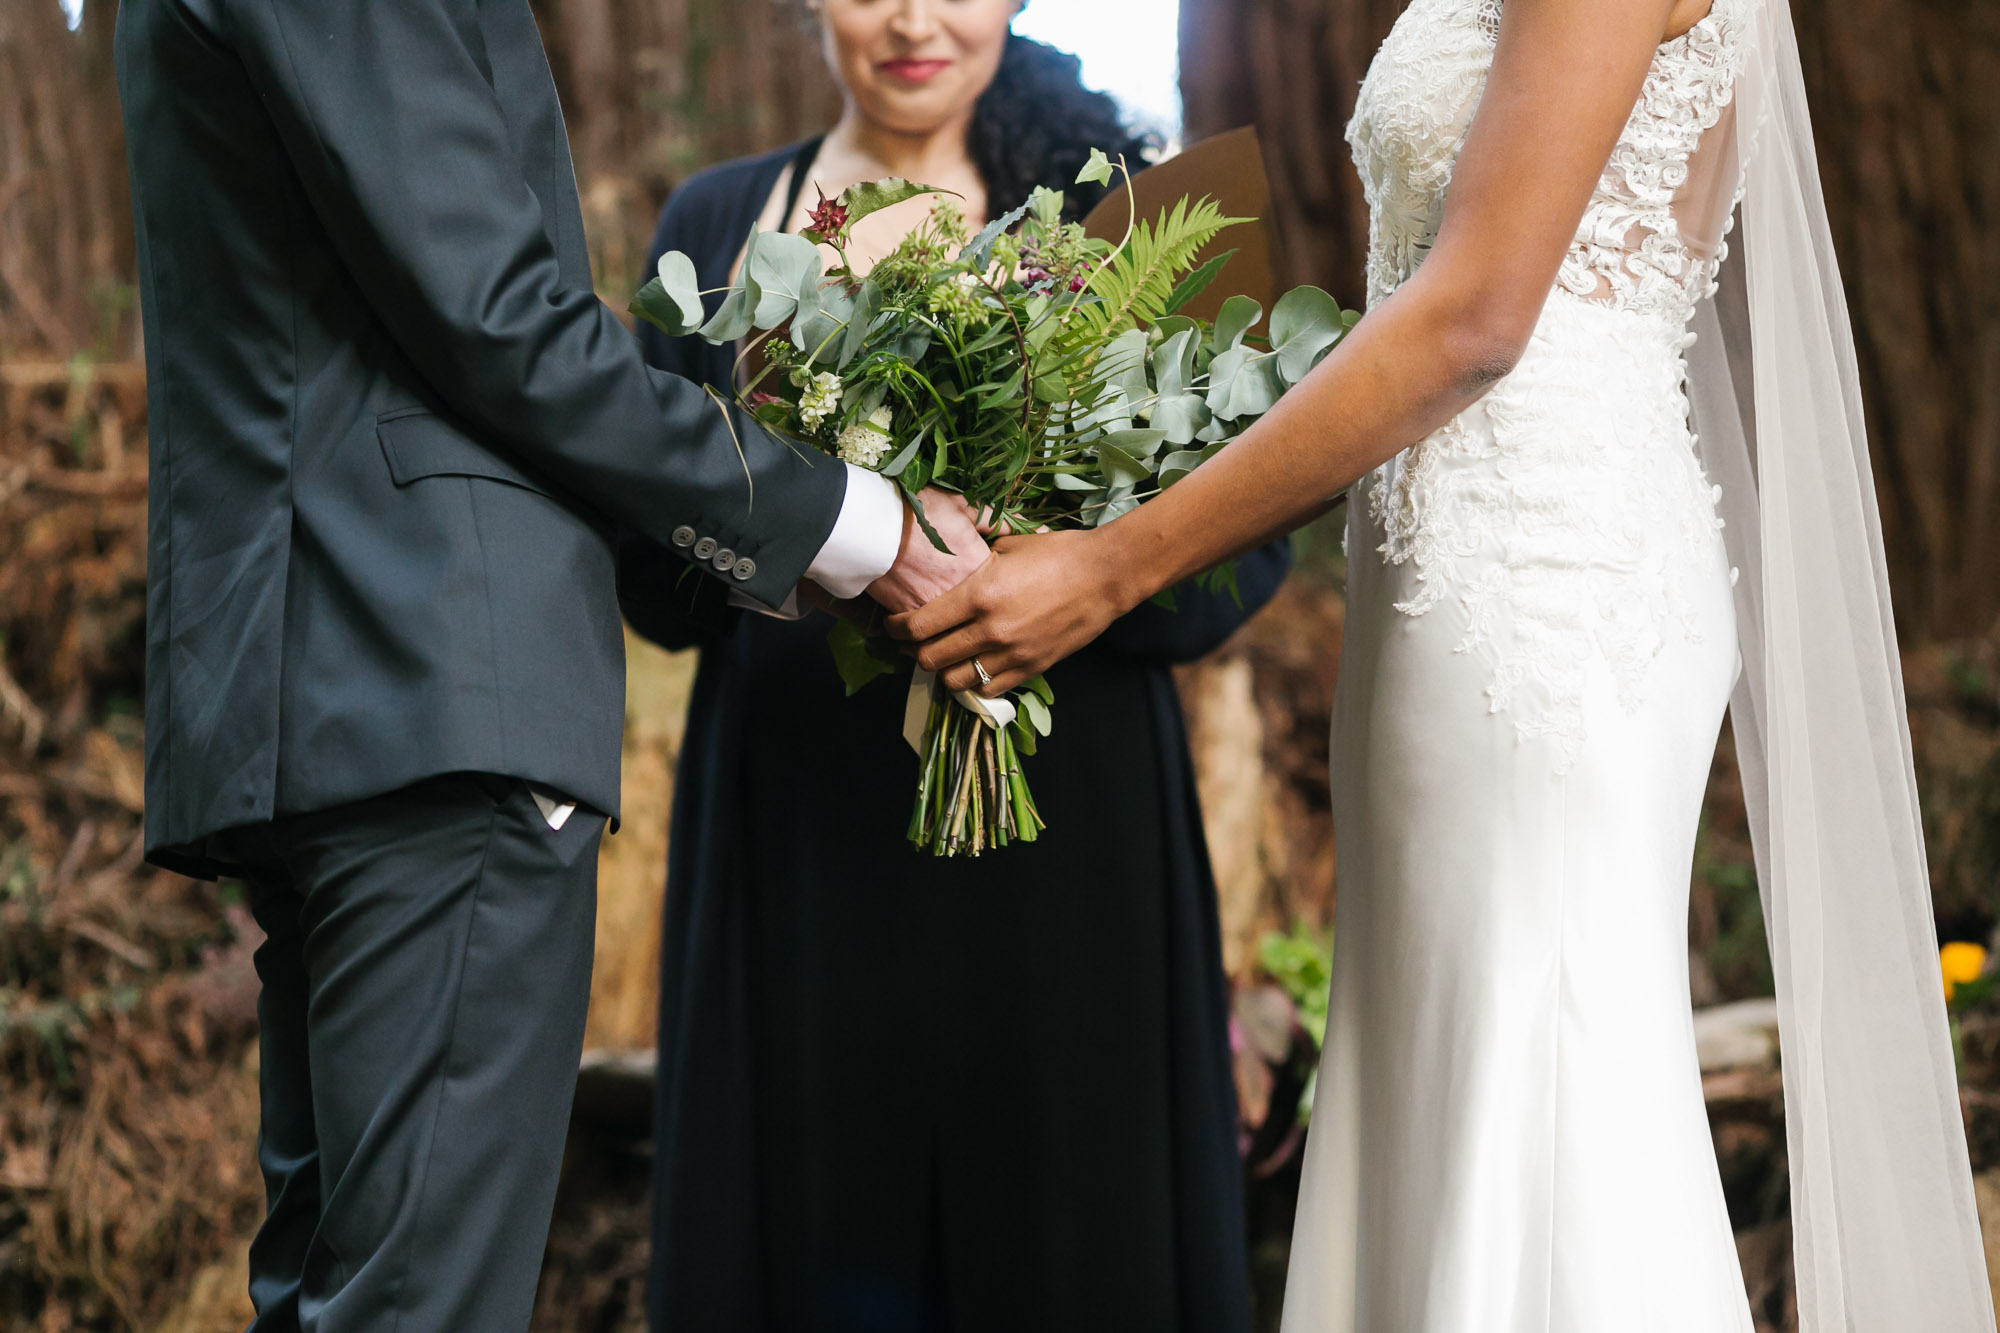 Wedding couple holding bouquet together during ceremony under the trees